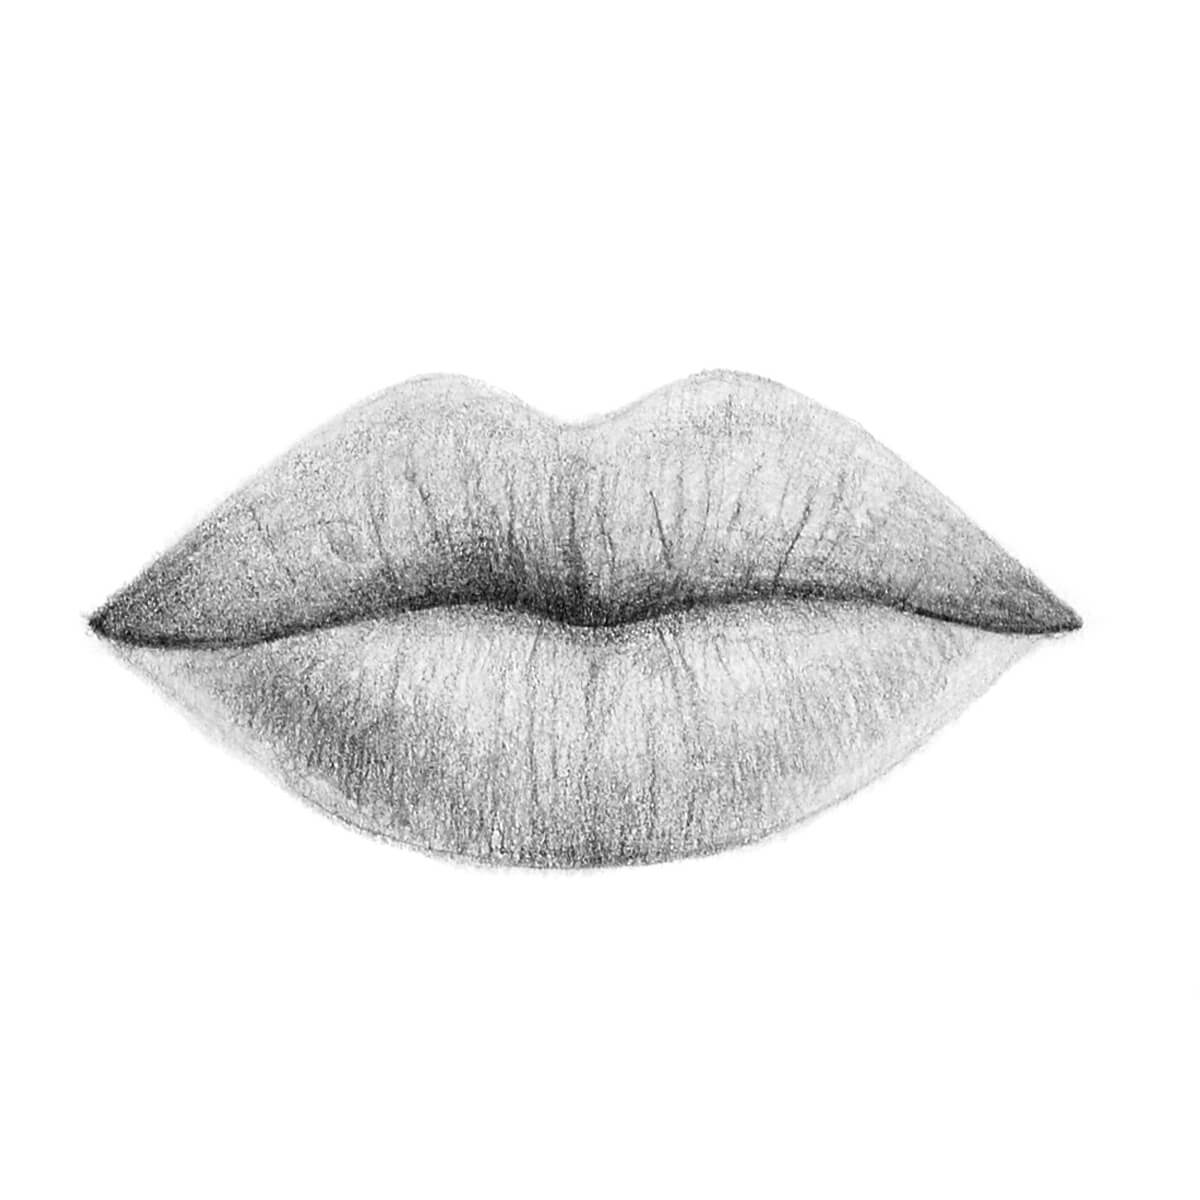 lips drawing easy - step 6